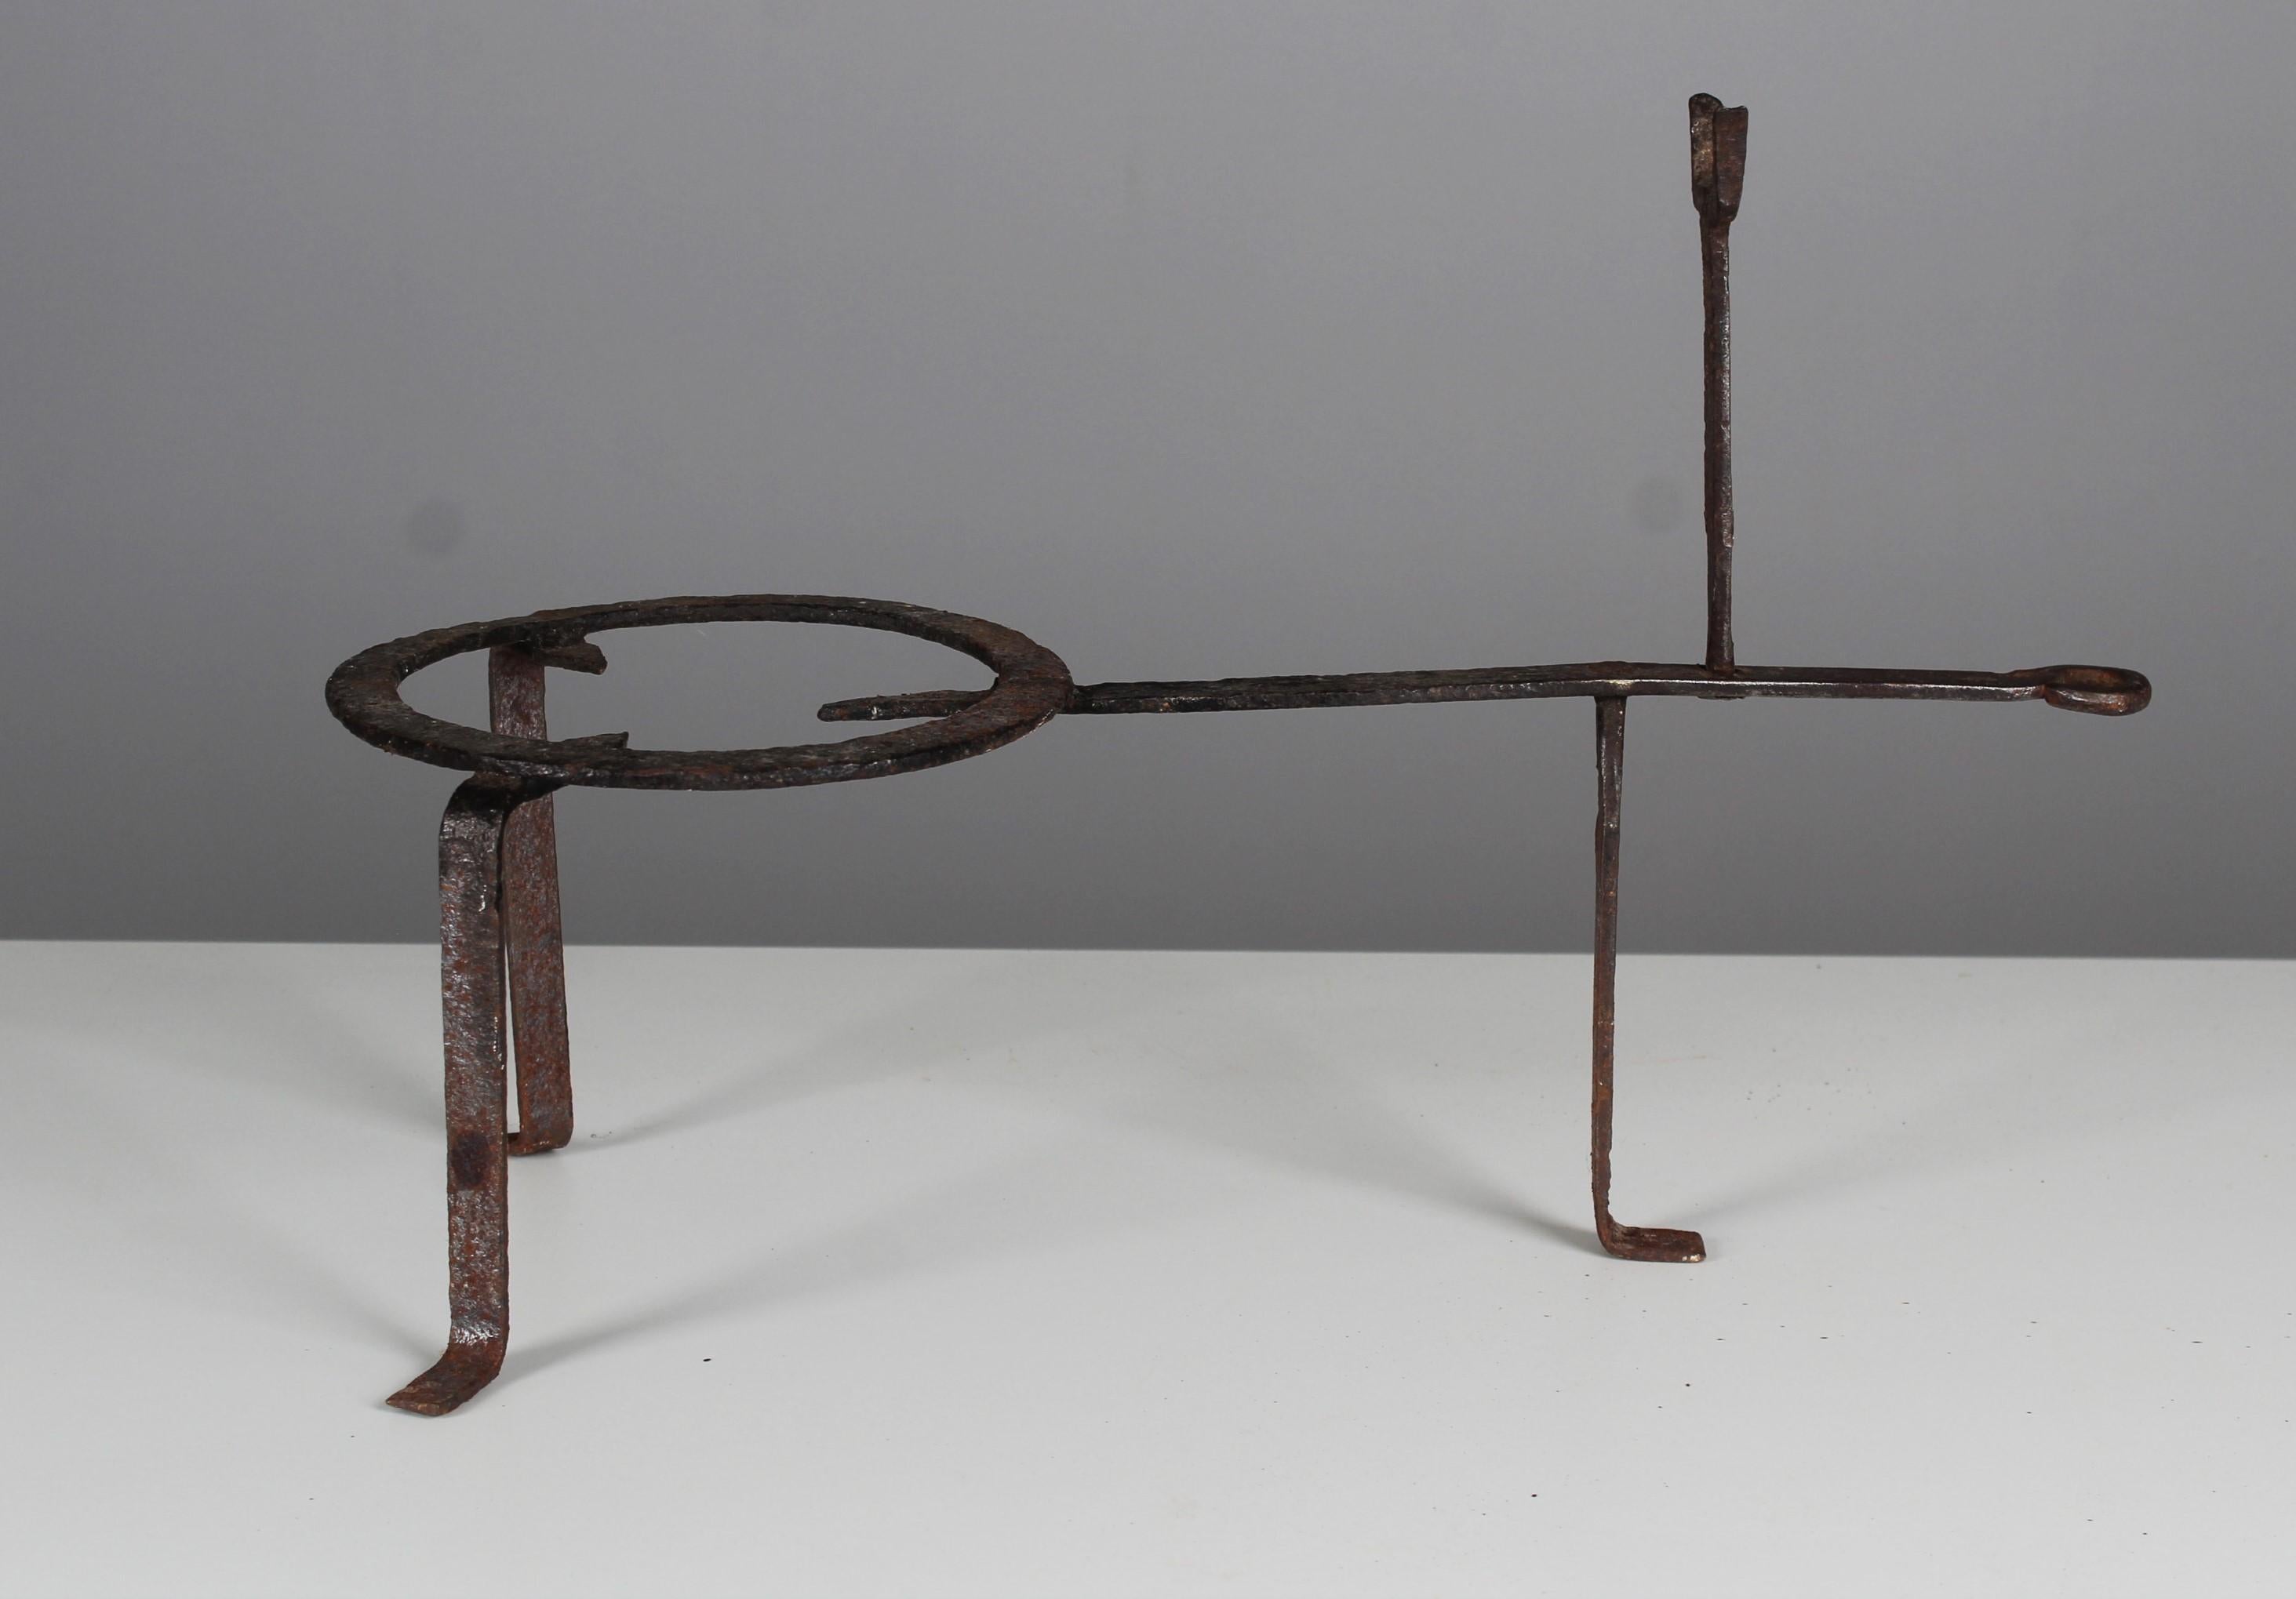 Antique pot rack, handmade of iron.
France, 19th century / maybe 17th century.
Solid iron in good condition according to its age.

In the 19th century, a lot of cooking was still done in the fireplace, on an open fire. The pot was placed on the